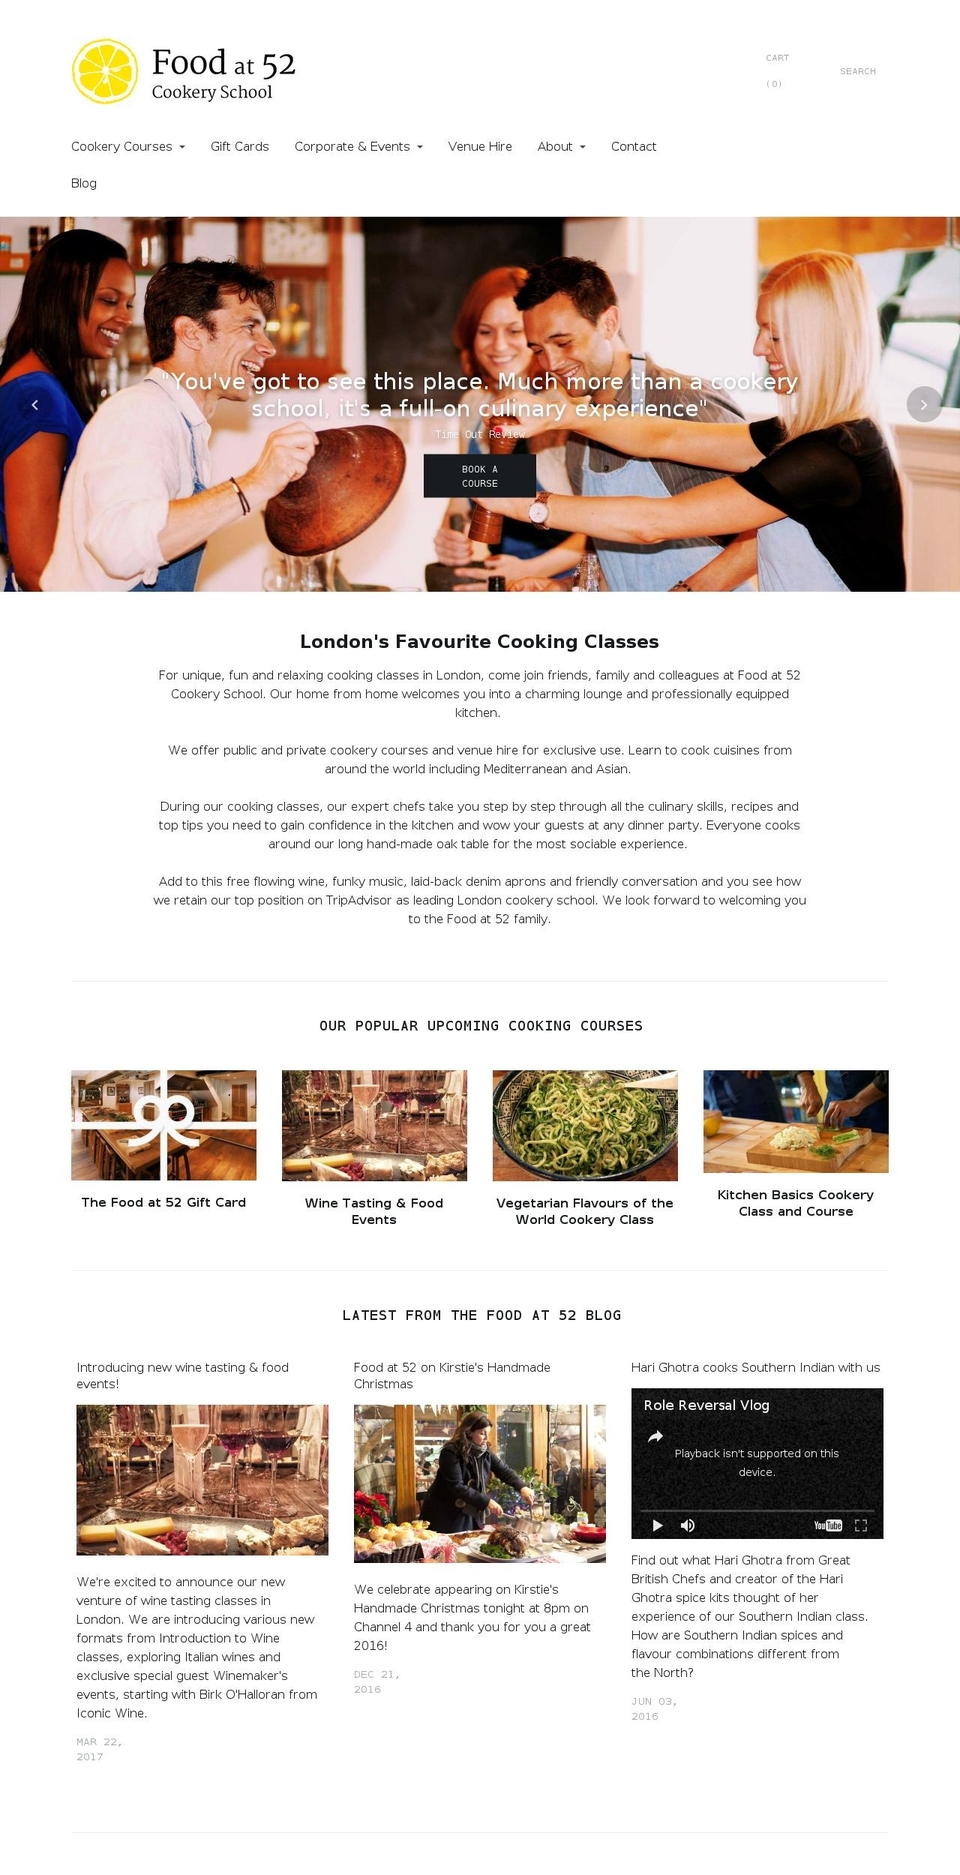 Cypress Shopify theme site example foodat52.co.uk